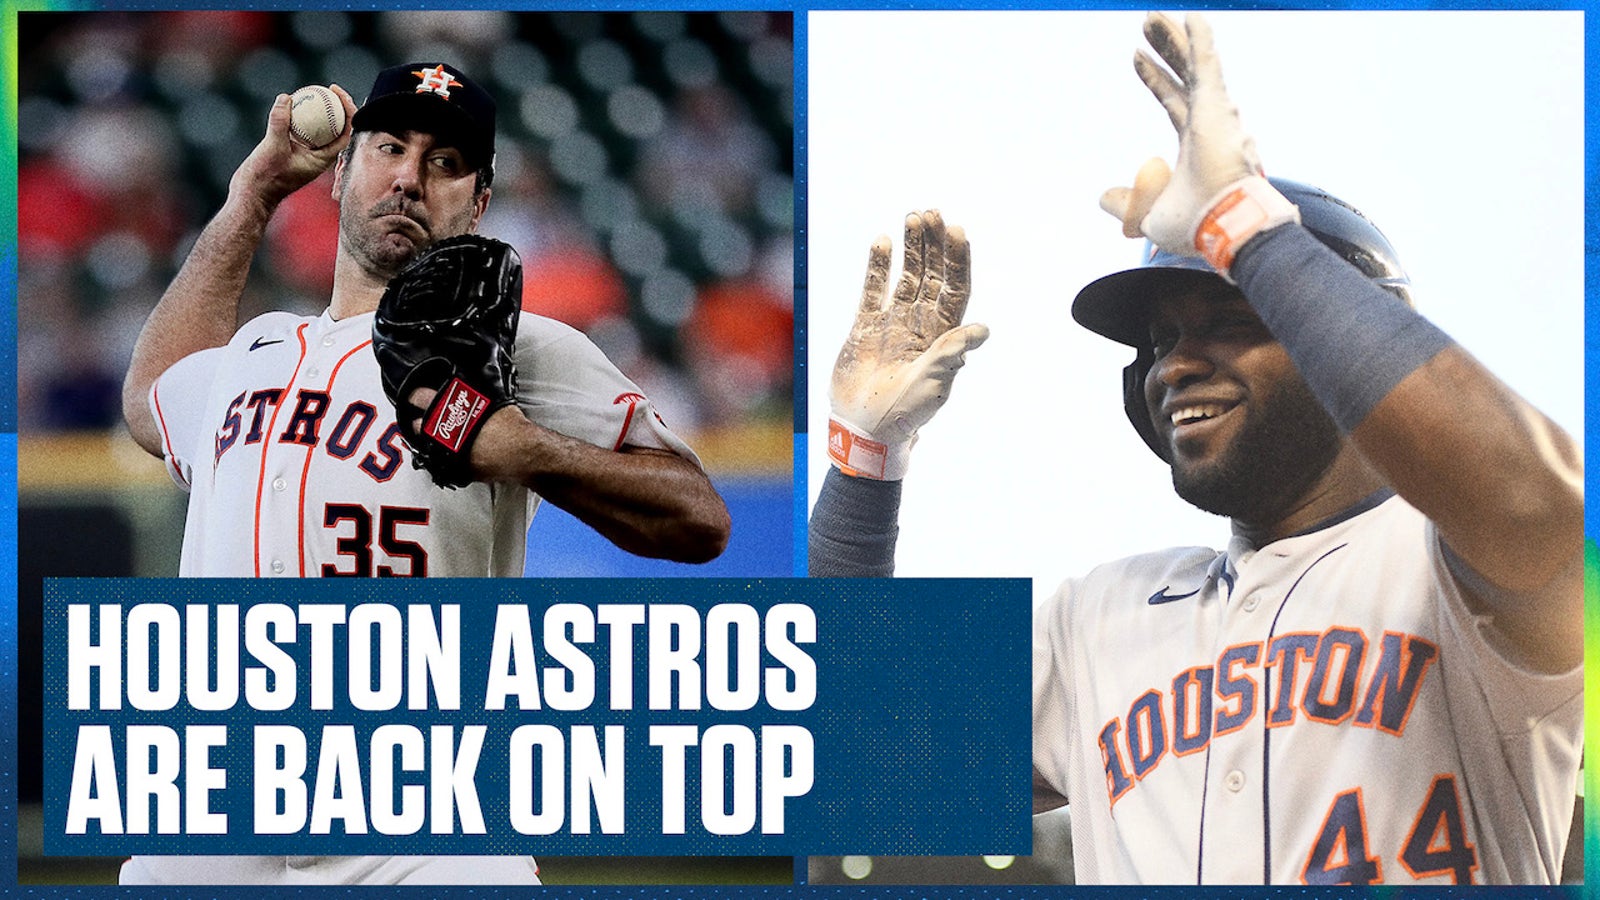 The Houston Astros are back on track